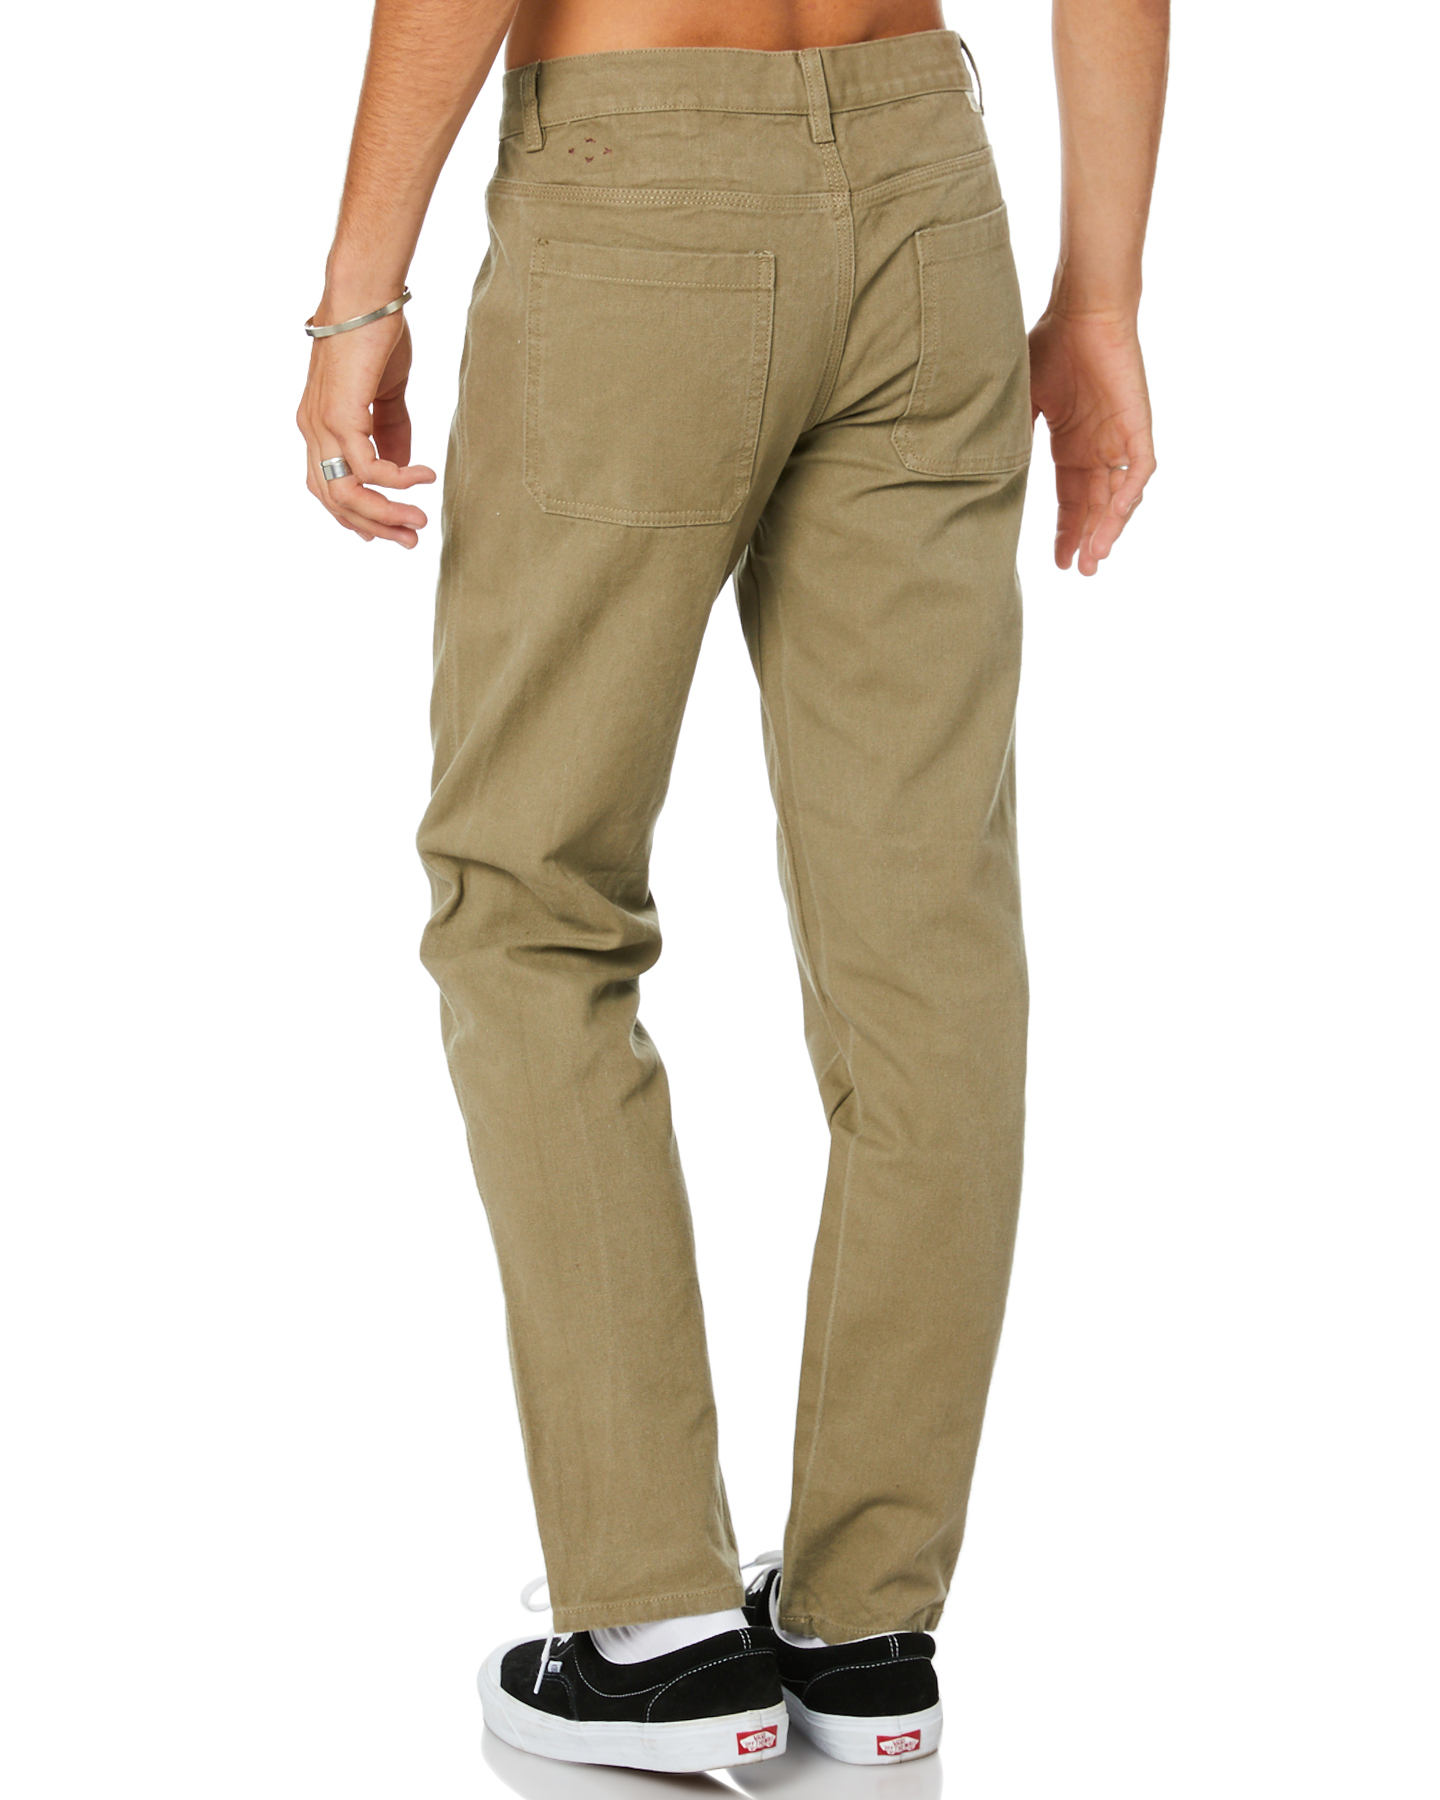 Mctavish Triple Sitched Canvas Mens Pant - Washed Tobacco | SurfStitch